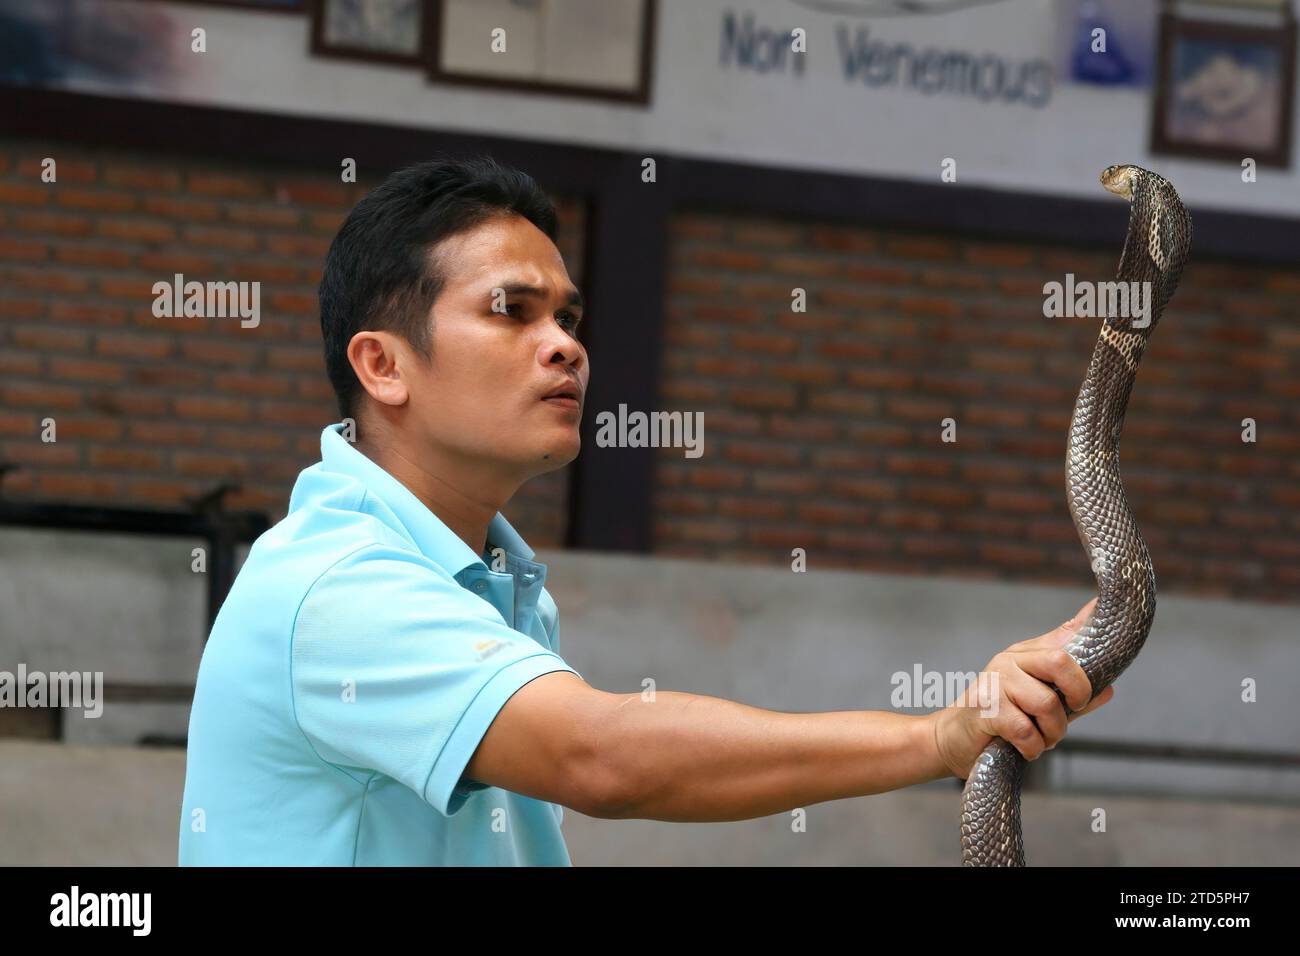 Thailand, Phuket-03 May, 201: Asian man demonstrating with 3 snakes during a show, Yellow and Black Mangrove snake. Stock Photo